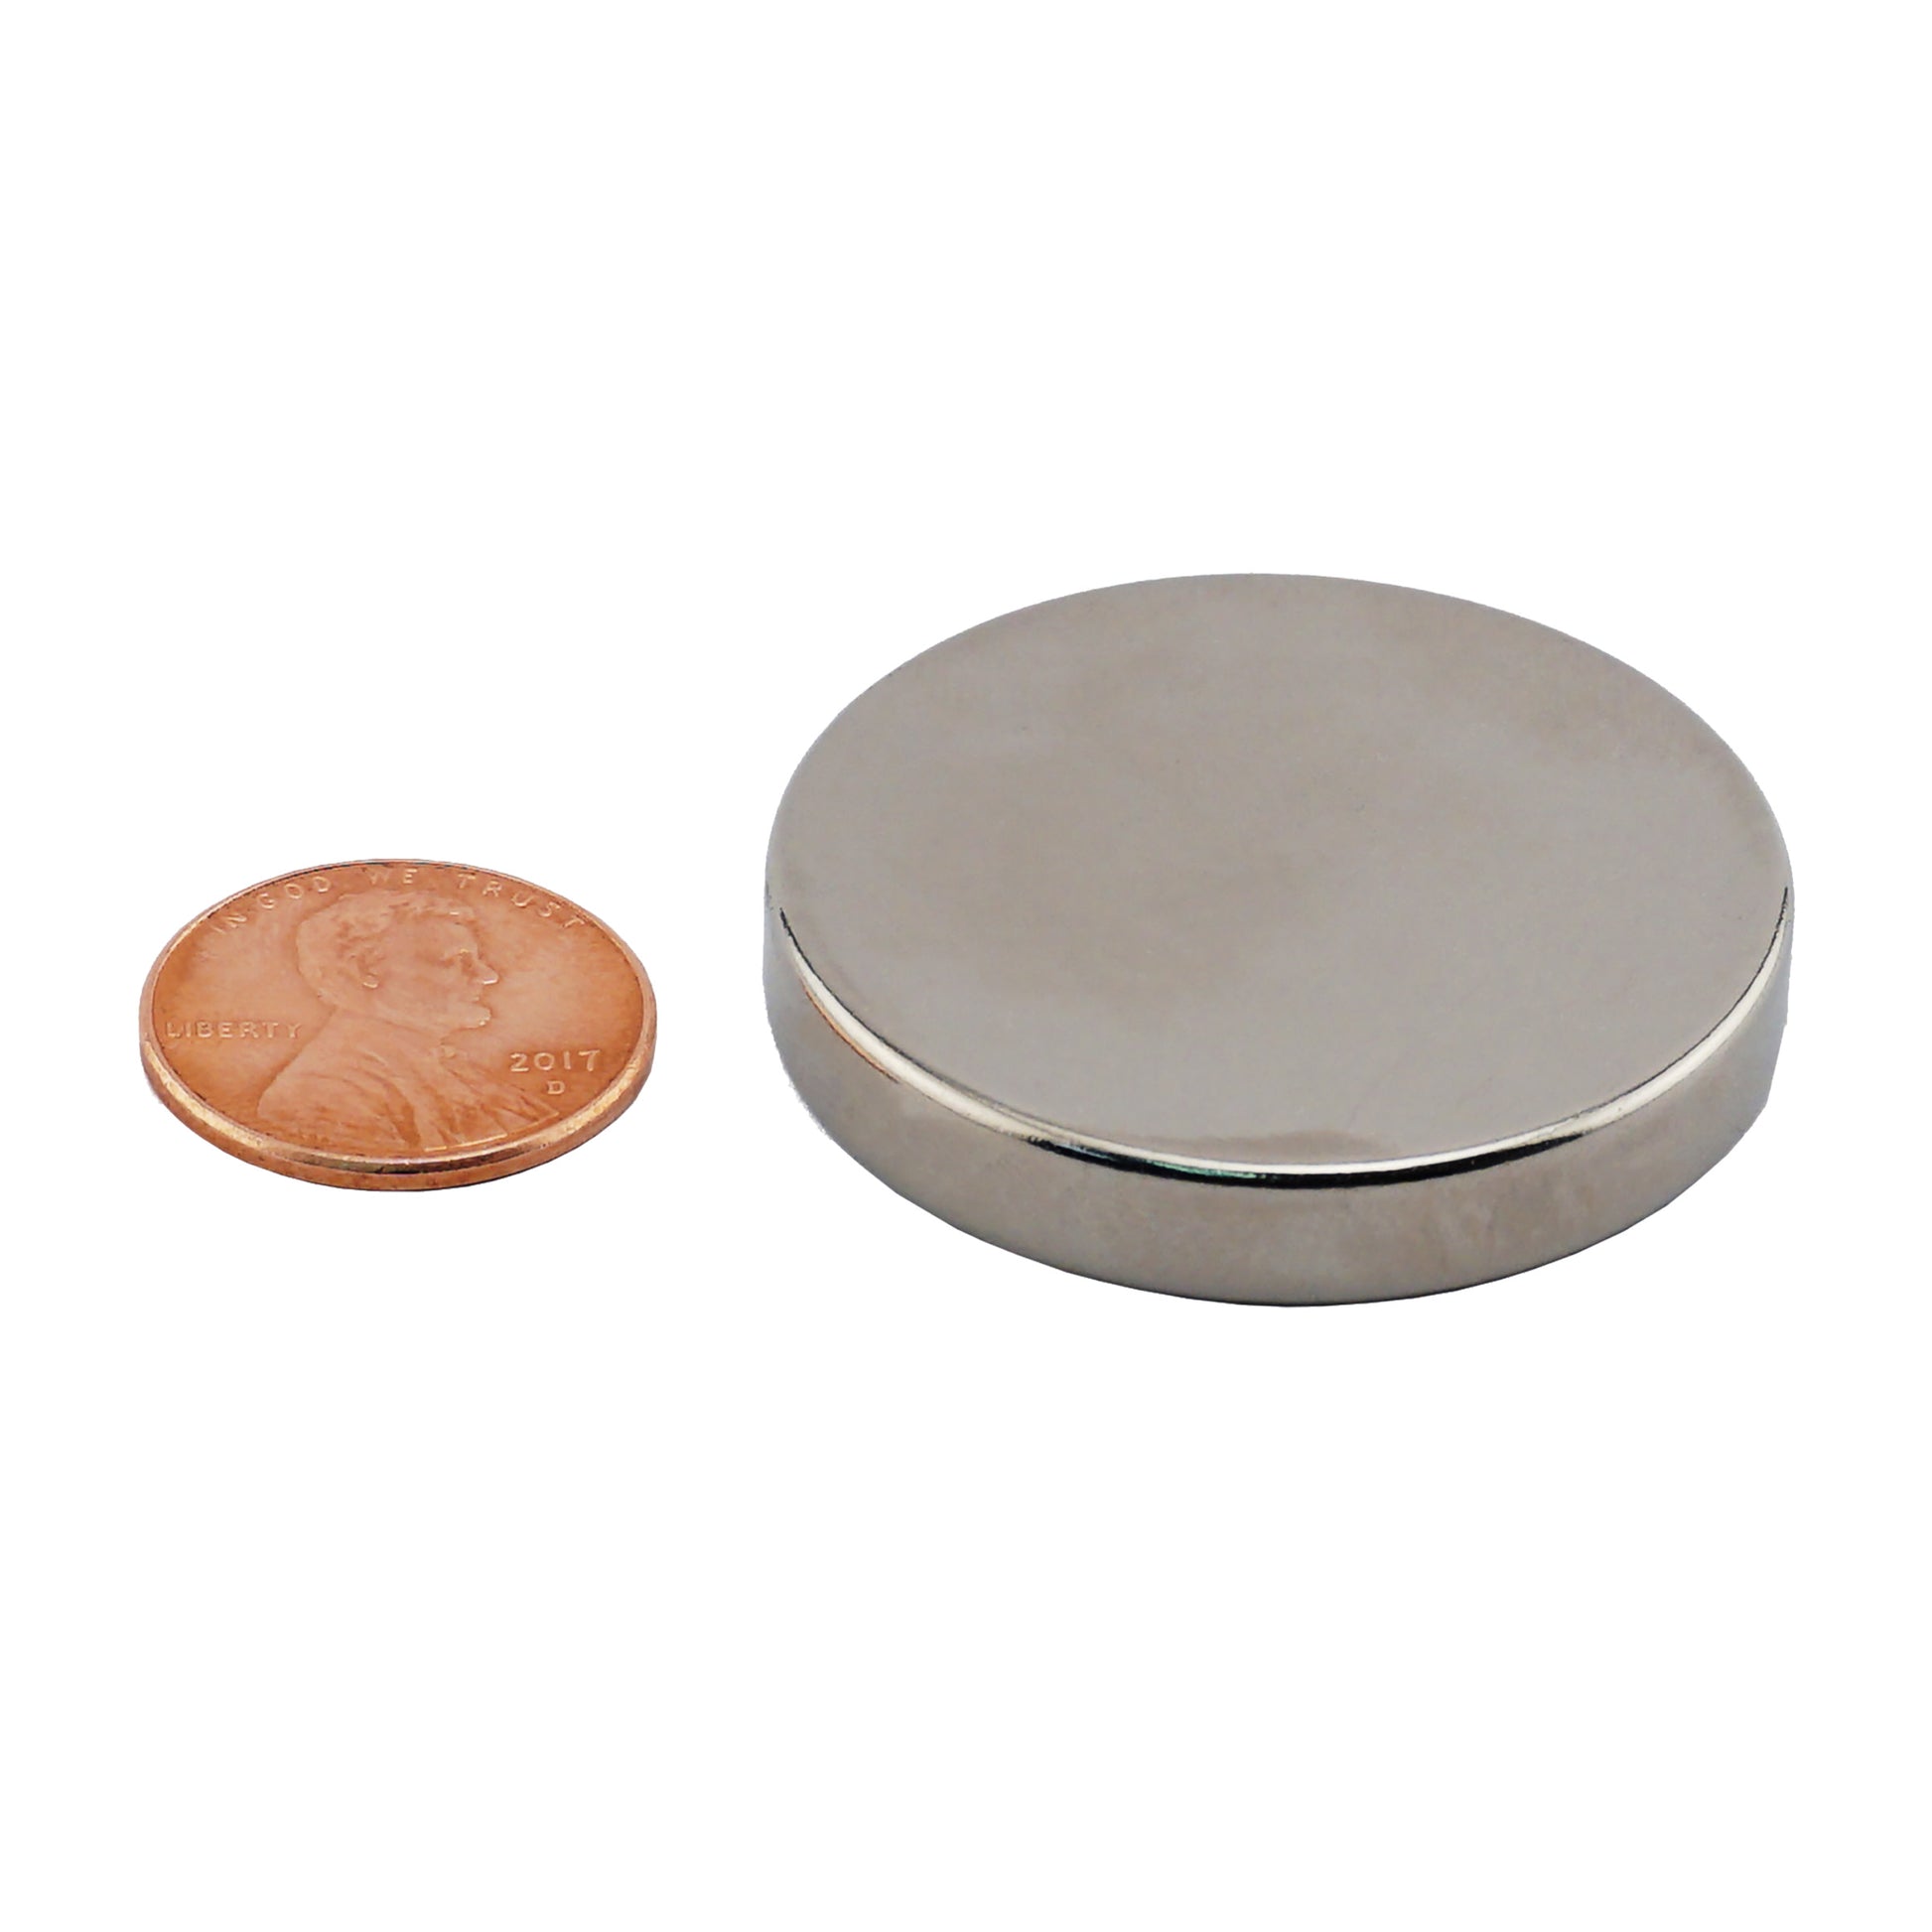 Load image into Gallery viewer, ND45-1.5X25N Neodymium Disc Magnet - Compared to Penny for Size Reference